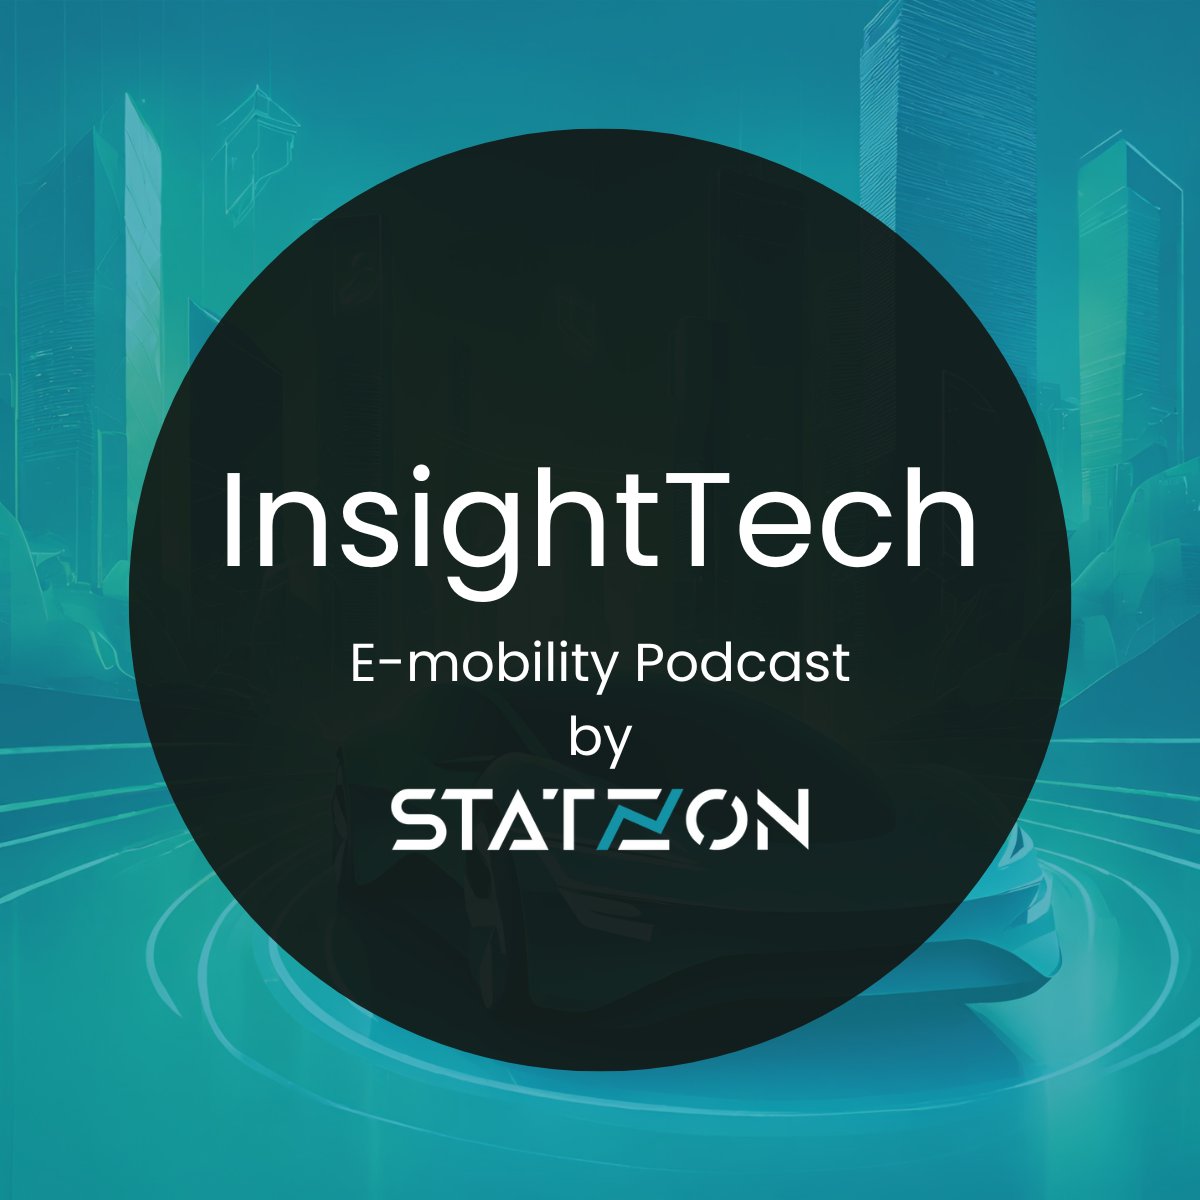 🎧 You can find the episode on your favorite streaming platform!
⚡️ Statzon InsightTech: Unveiling E-Mobility Market Trends⚡
Available at Spotify, Apple, Amazon, Google, and Castbox.
👉 Spotify
eu1.hubs.ly/H06bccl0
#podcast #ev #fuelcell #fuelcells #hydrogen